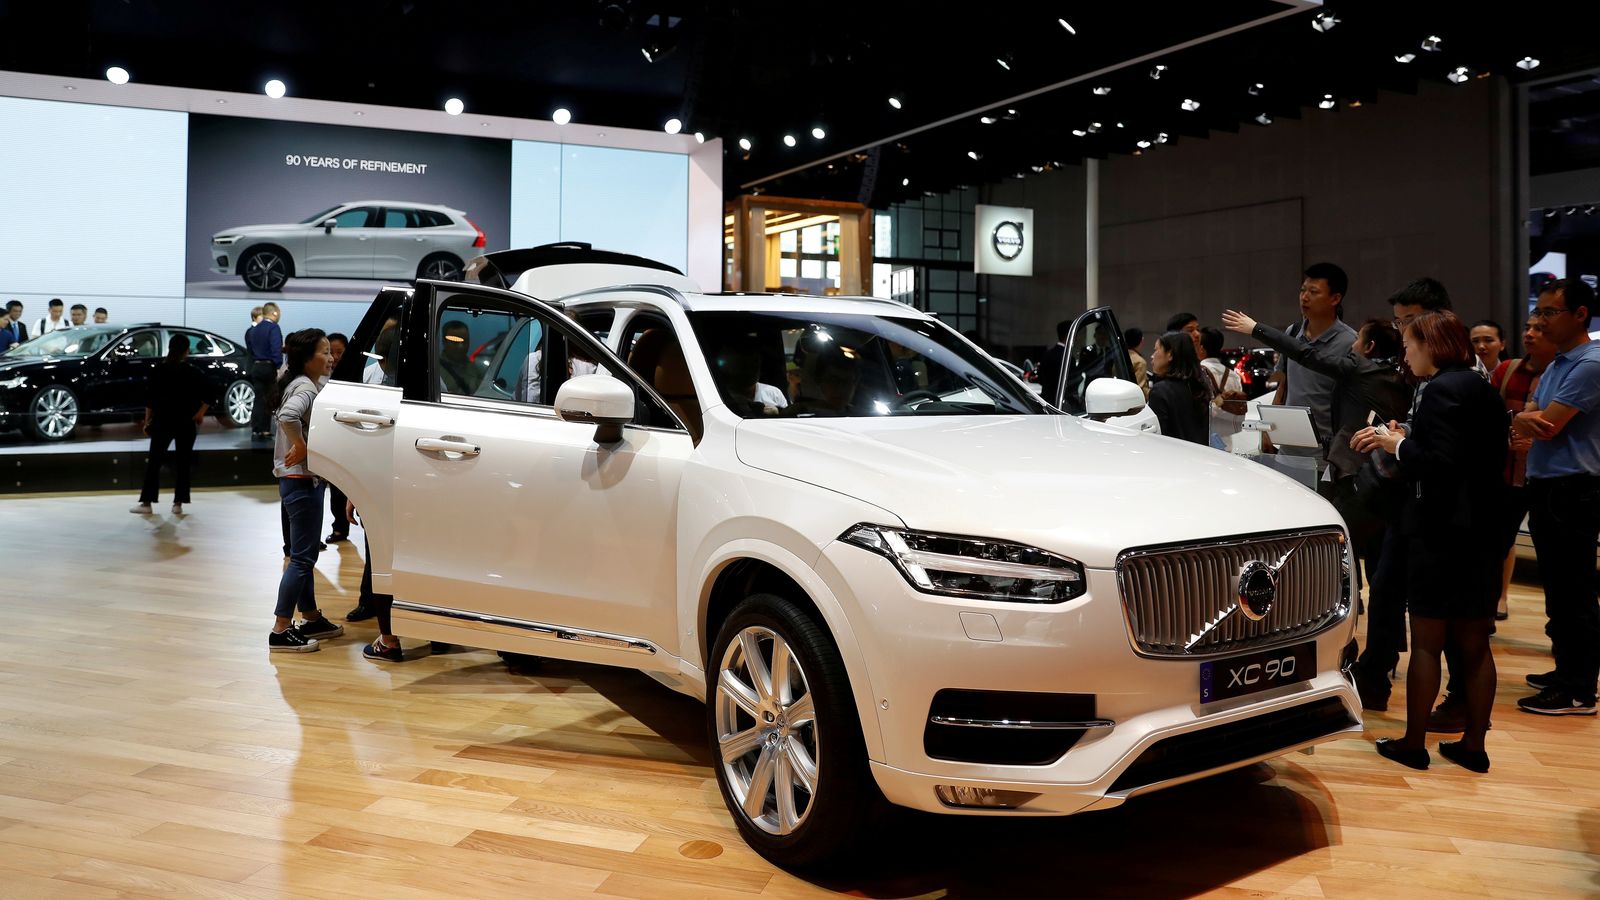 New Volvo XC90 launched in India at ₹89.9 lakh